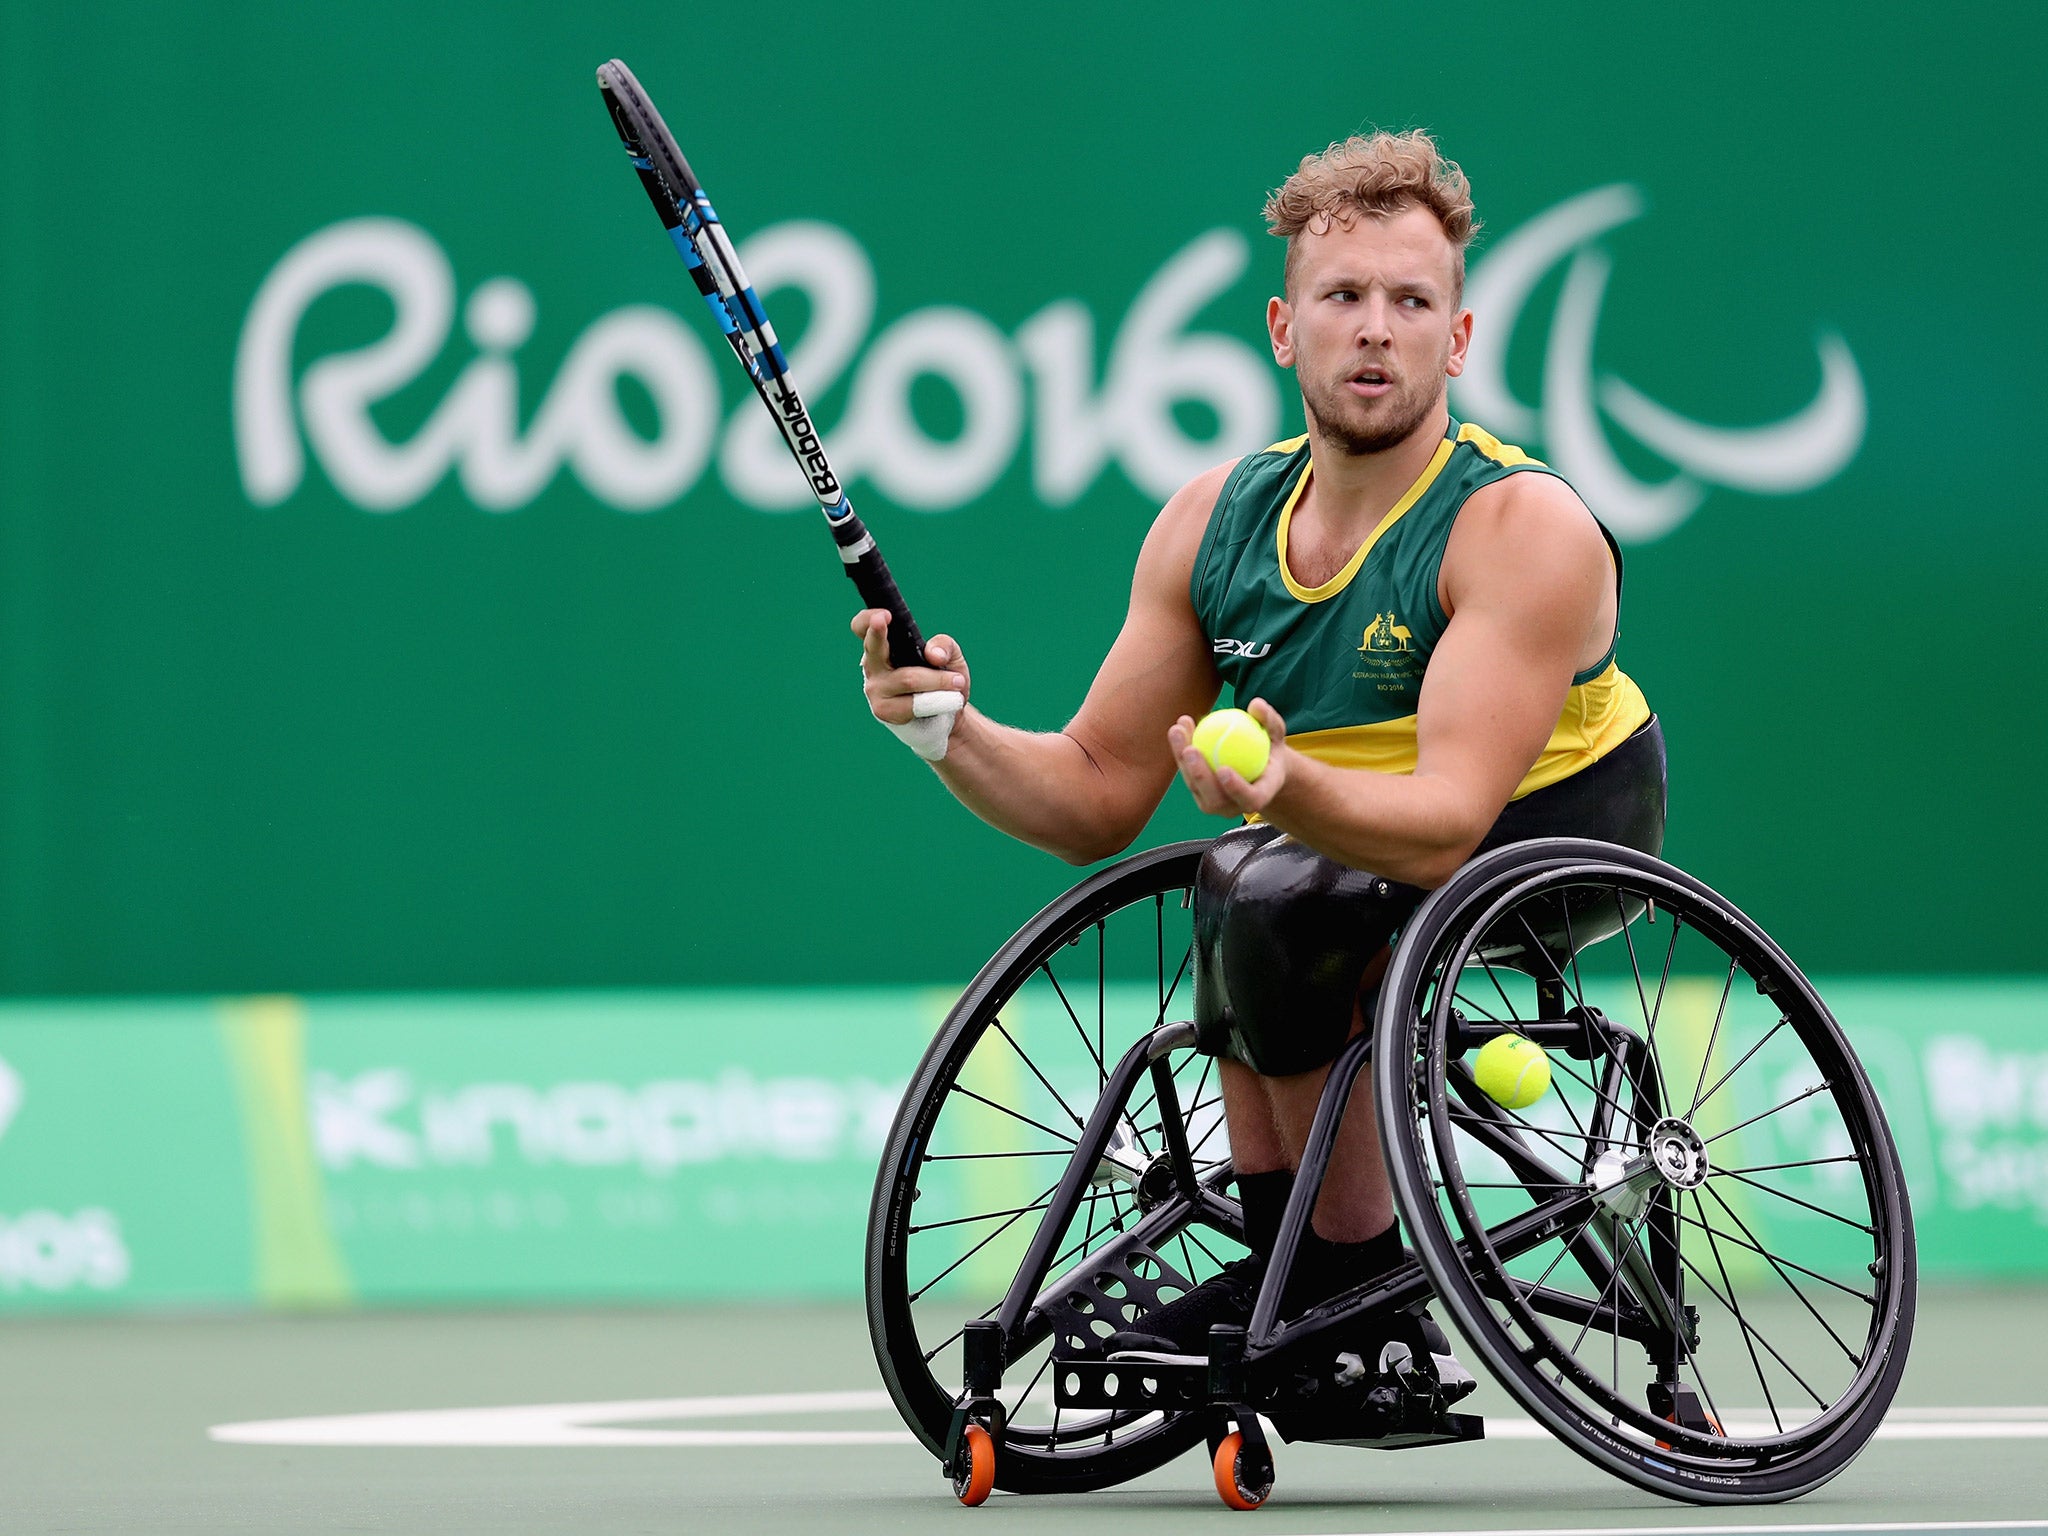 Dylan Alcott won gold in the men's quad doubles alongside Heath Davidson at the Paralympics